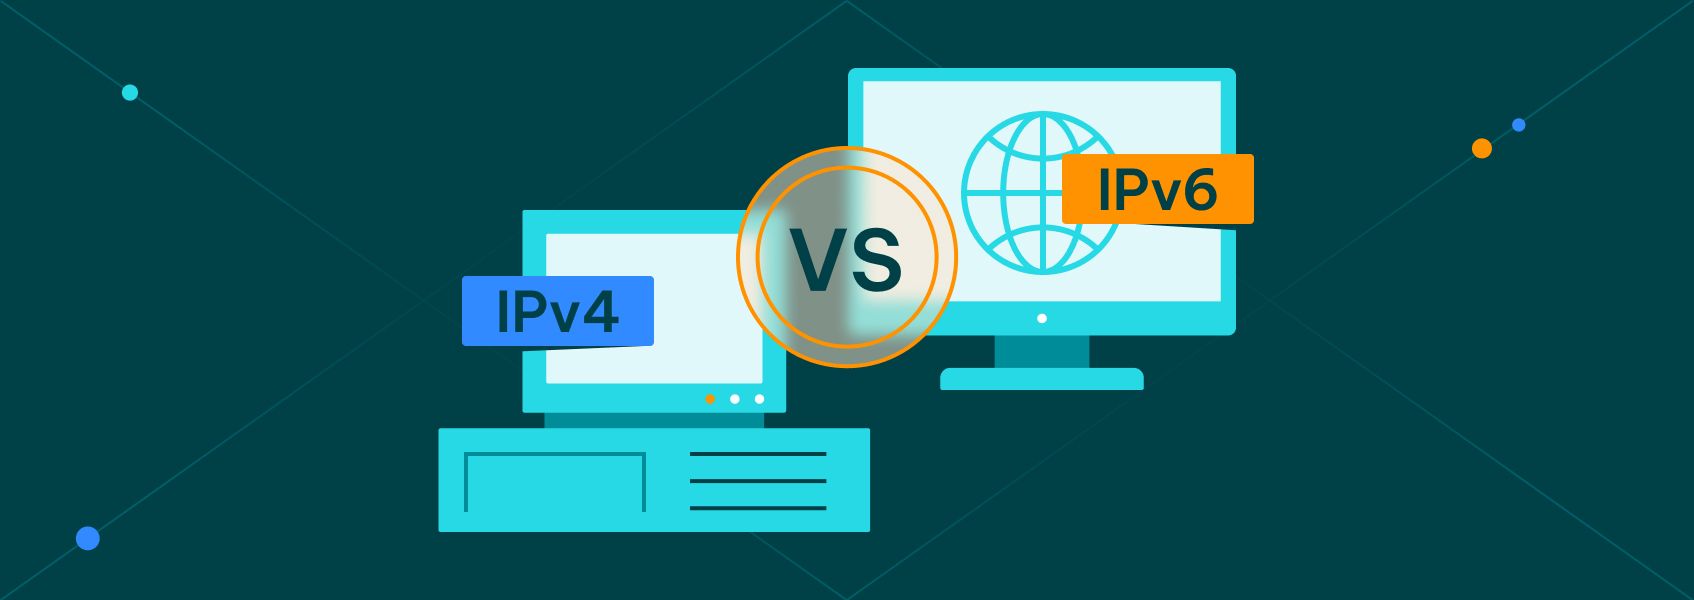 IPv4 vs. IPv6: What is the Difference?